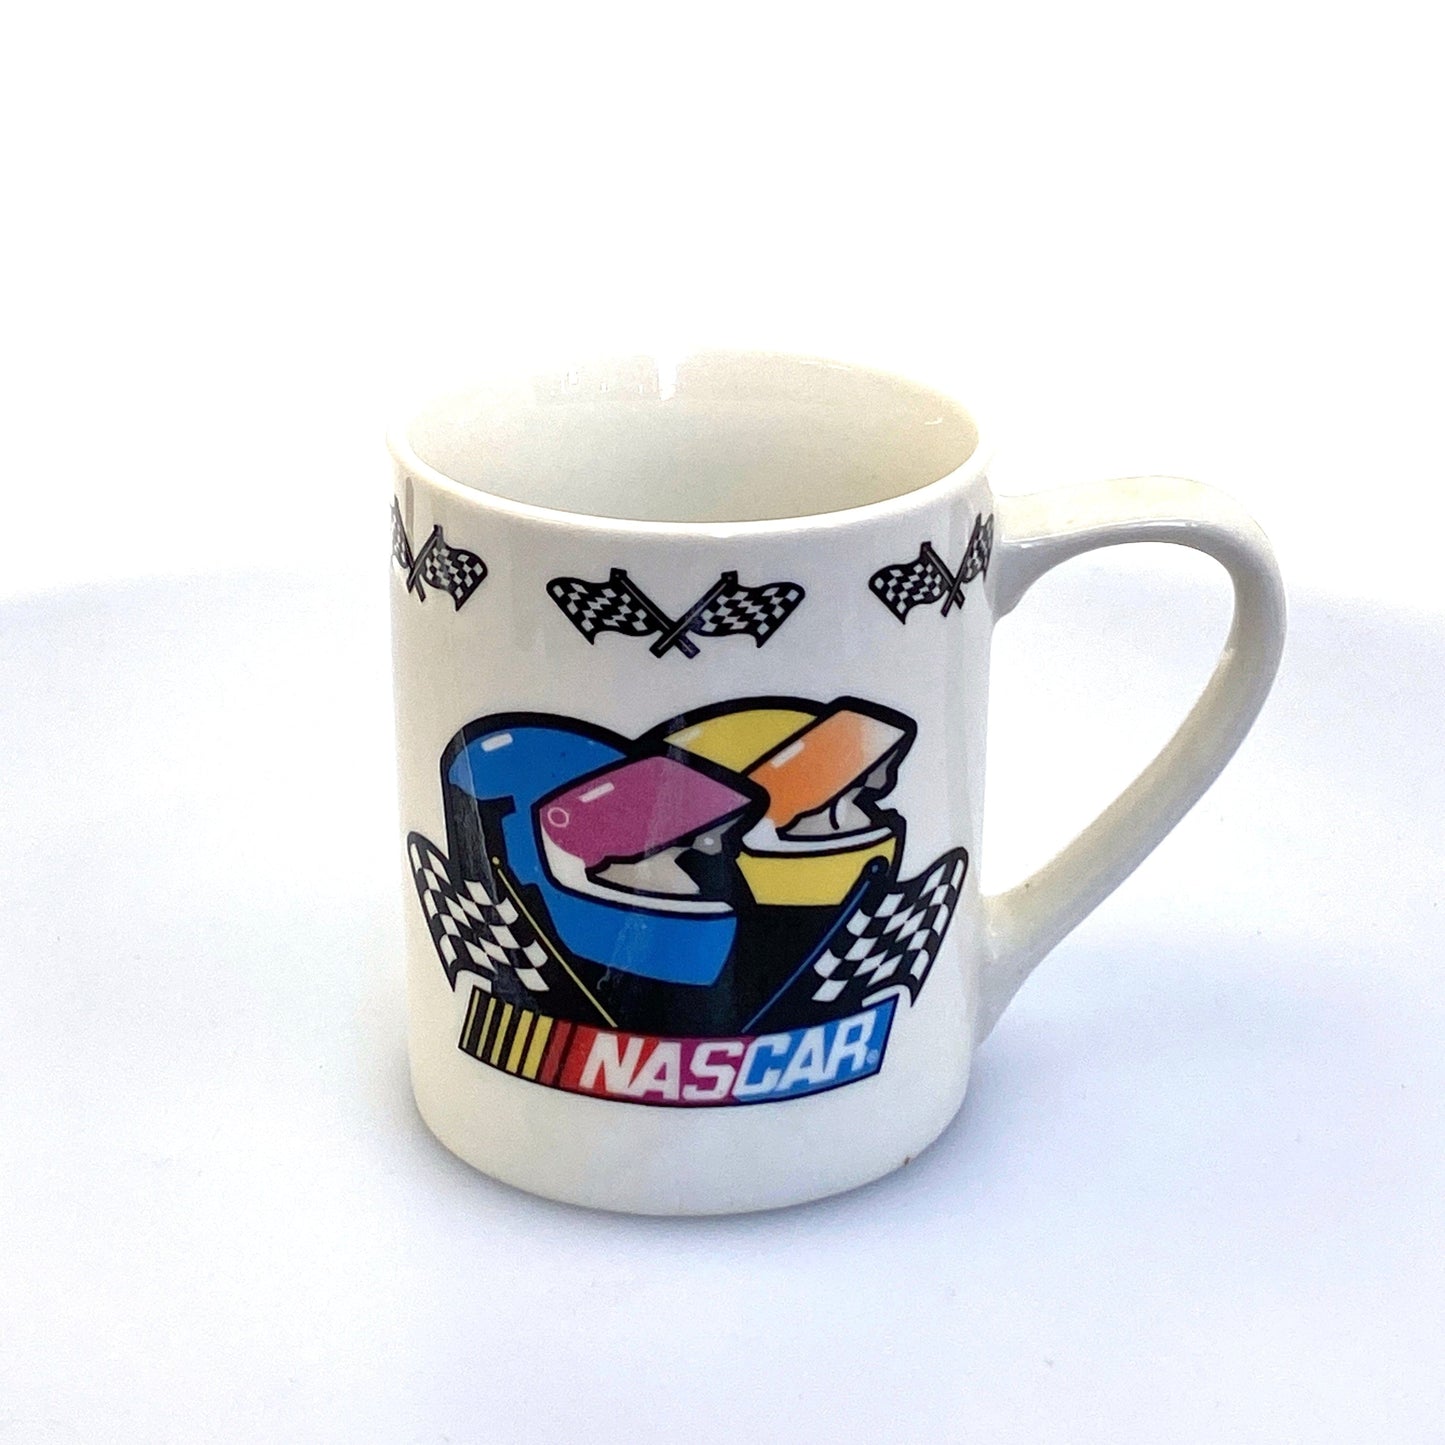 Nascar Coffee Cups Set of 4 Marketed by Gibson 2002 Licensed by Nascar